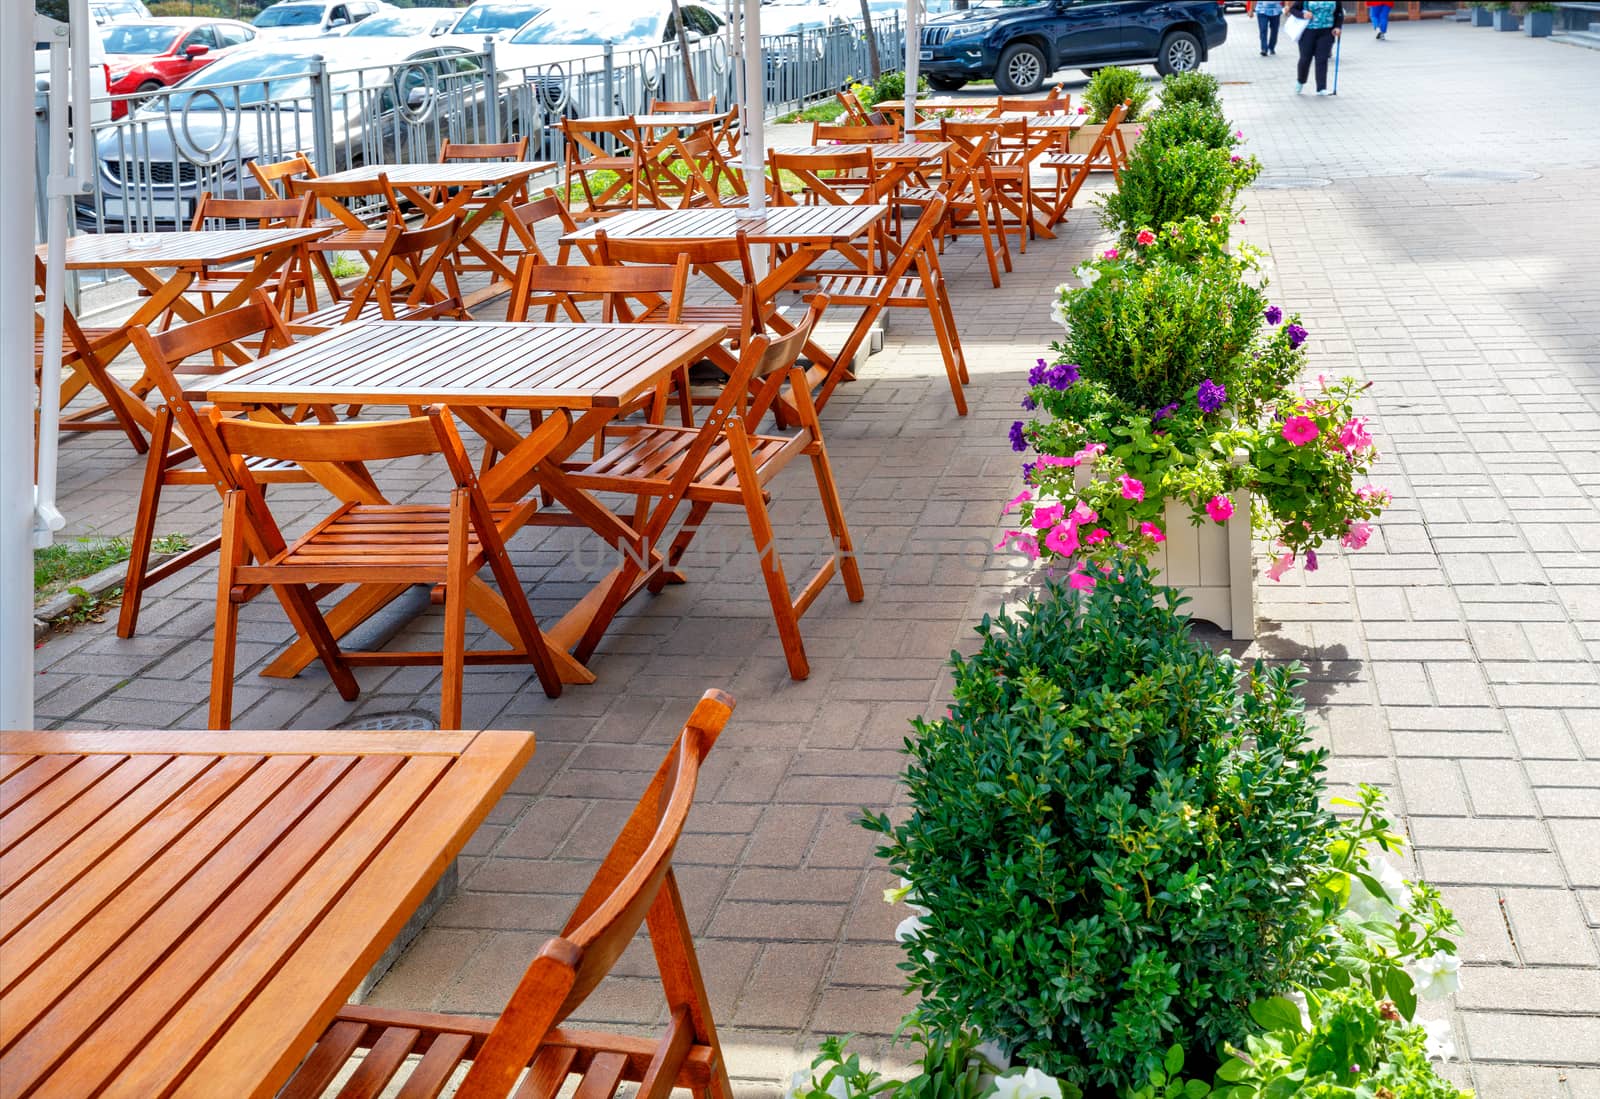 A deserted city street cafe, empty tables and chairs on the sidewalk under a canopy. by Sergii